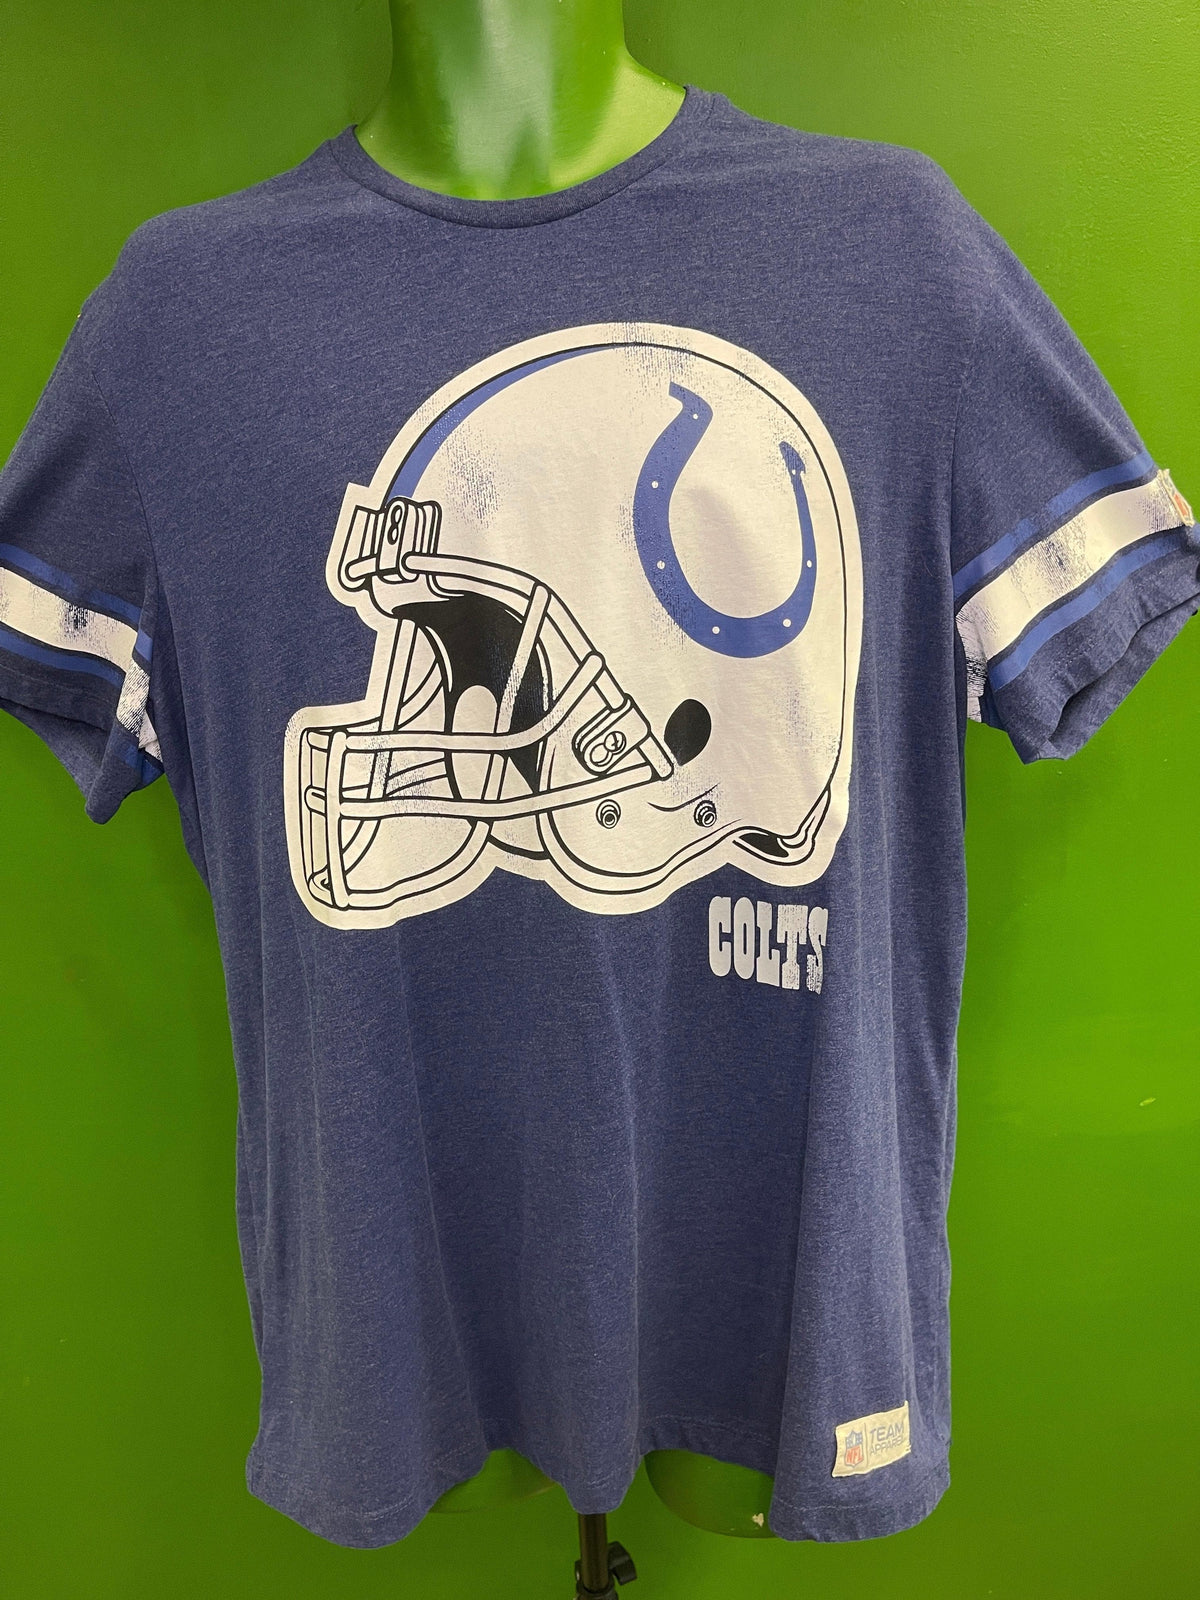 NFL Indianapolis Colts Logo Weathered T-Shirt Men's XL 45-47"